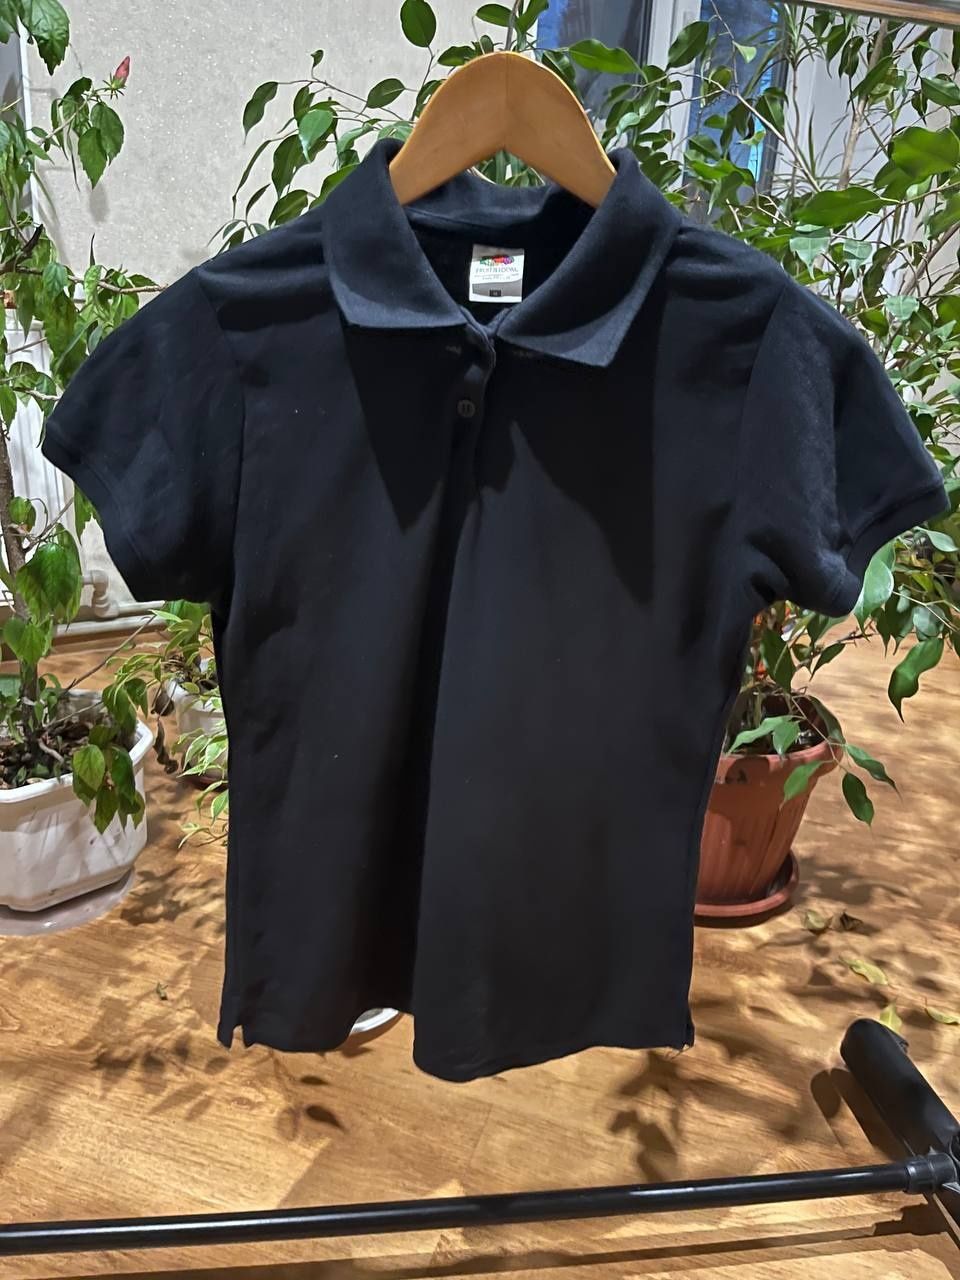 Black polo Fruit of the loom